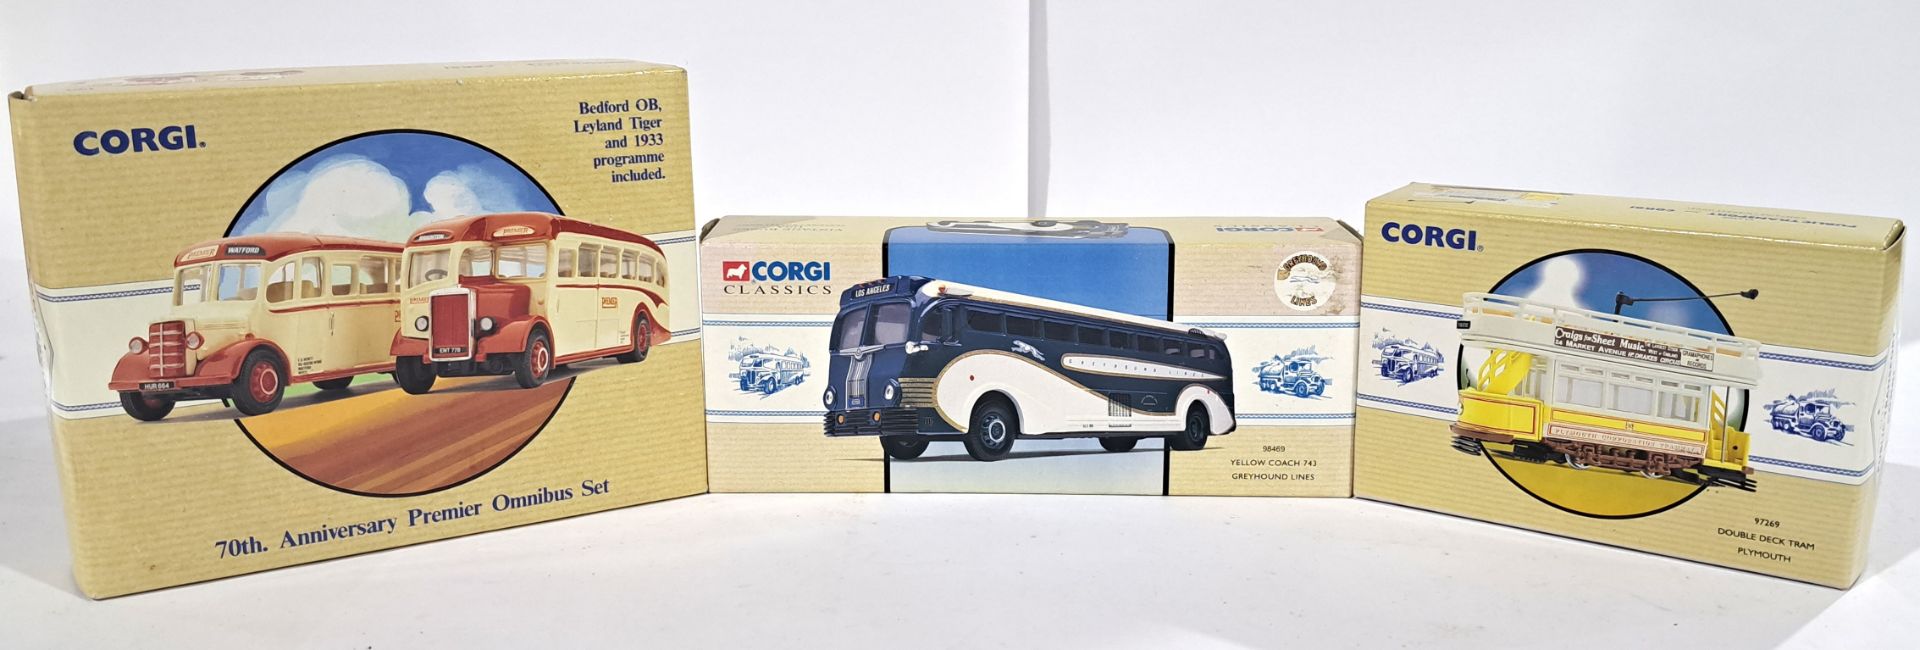 Corgi, a boxed Bus and Tram group - Image 2 of 3